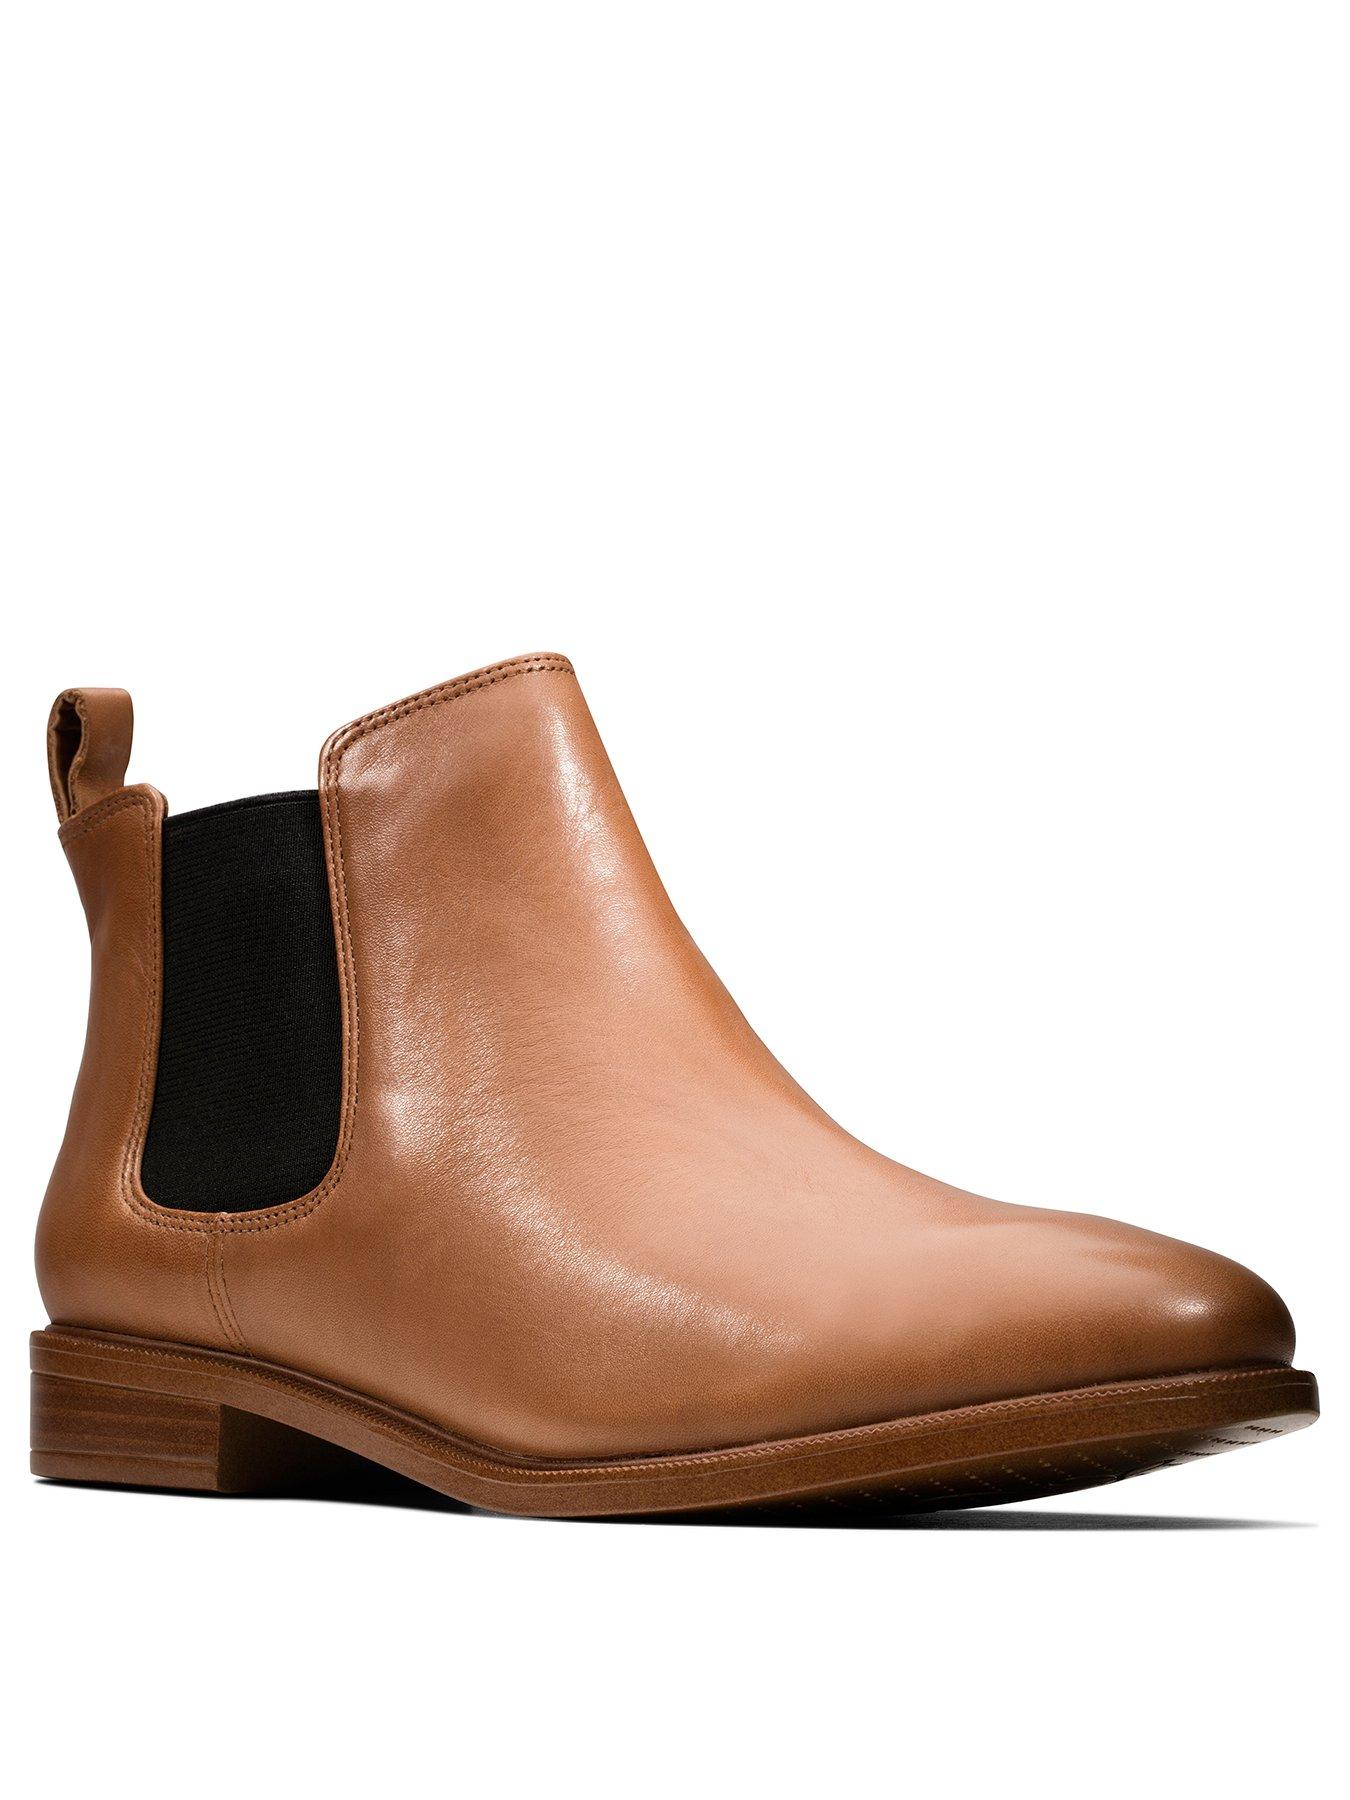 Men leather boots Details about   New Handmade Men Jodhpur Style Real Leather Brown Ankle Boots 